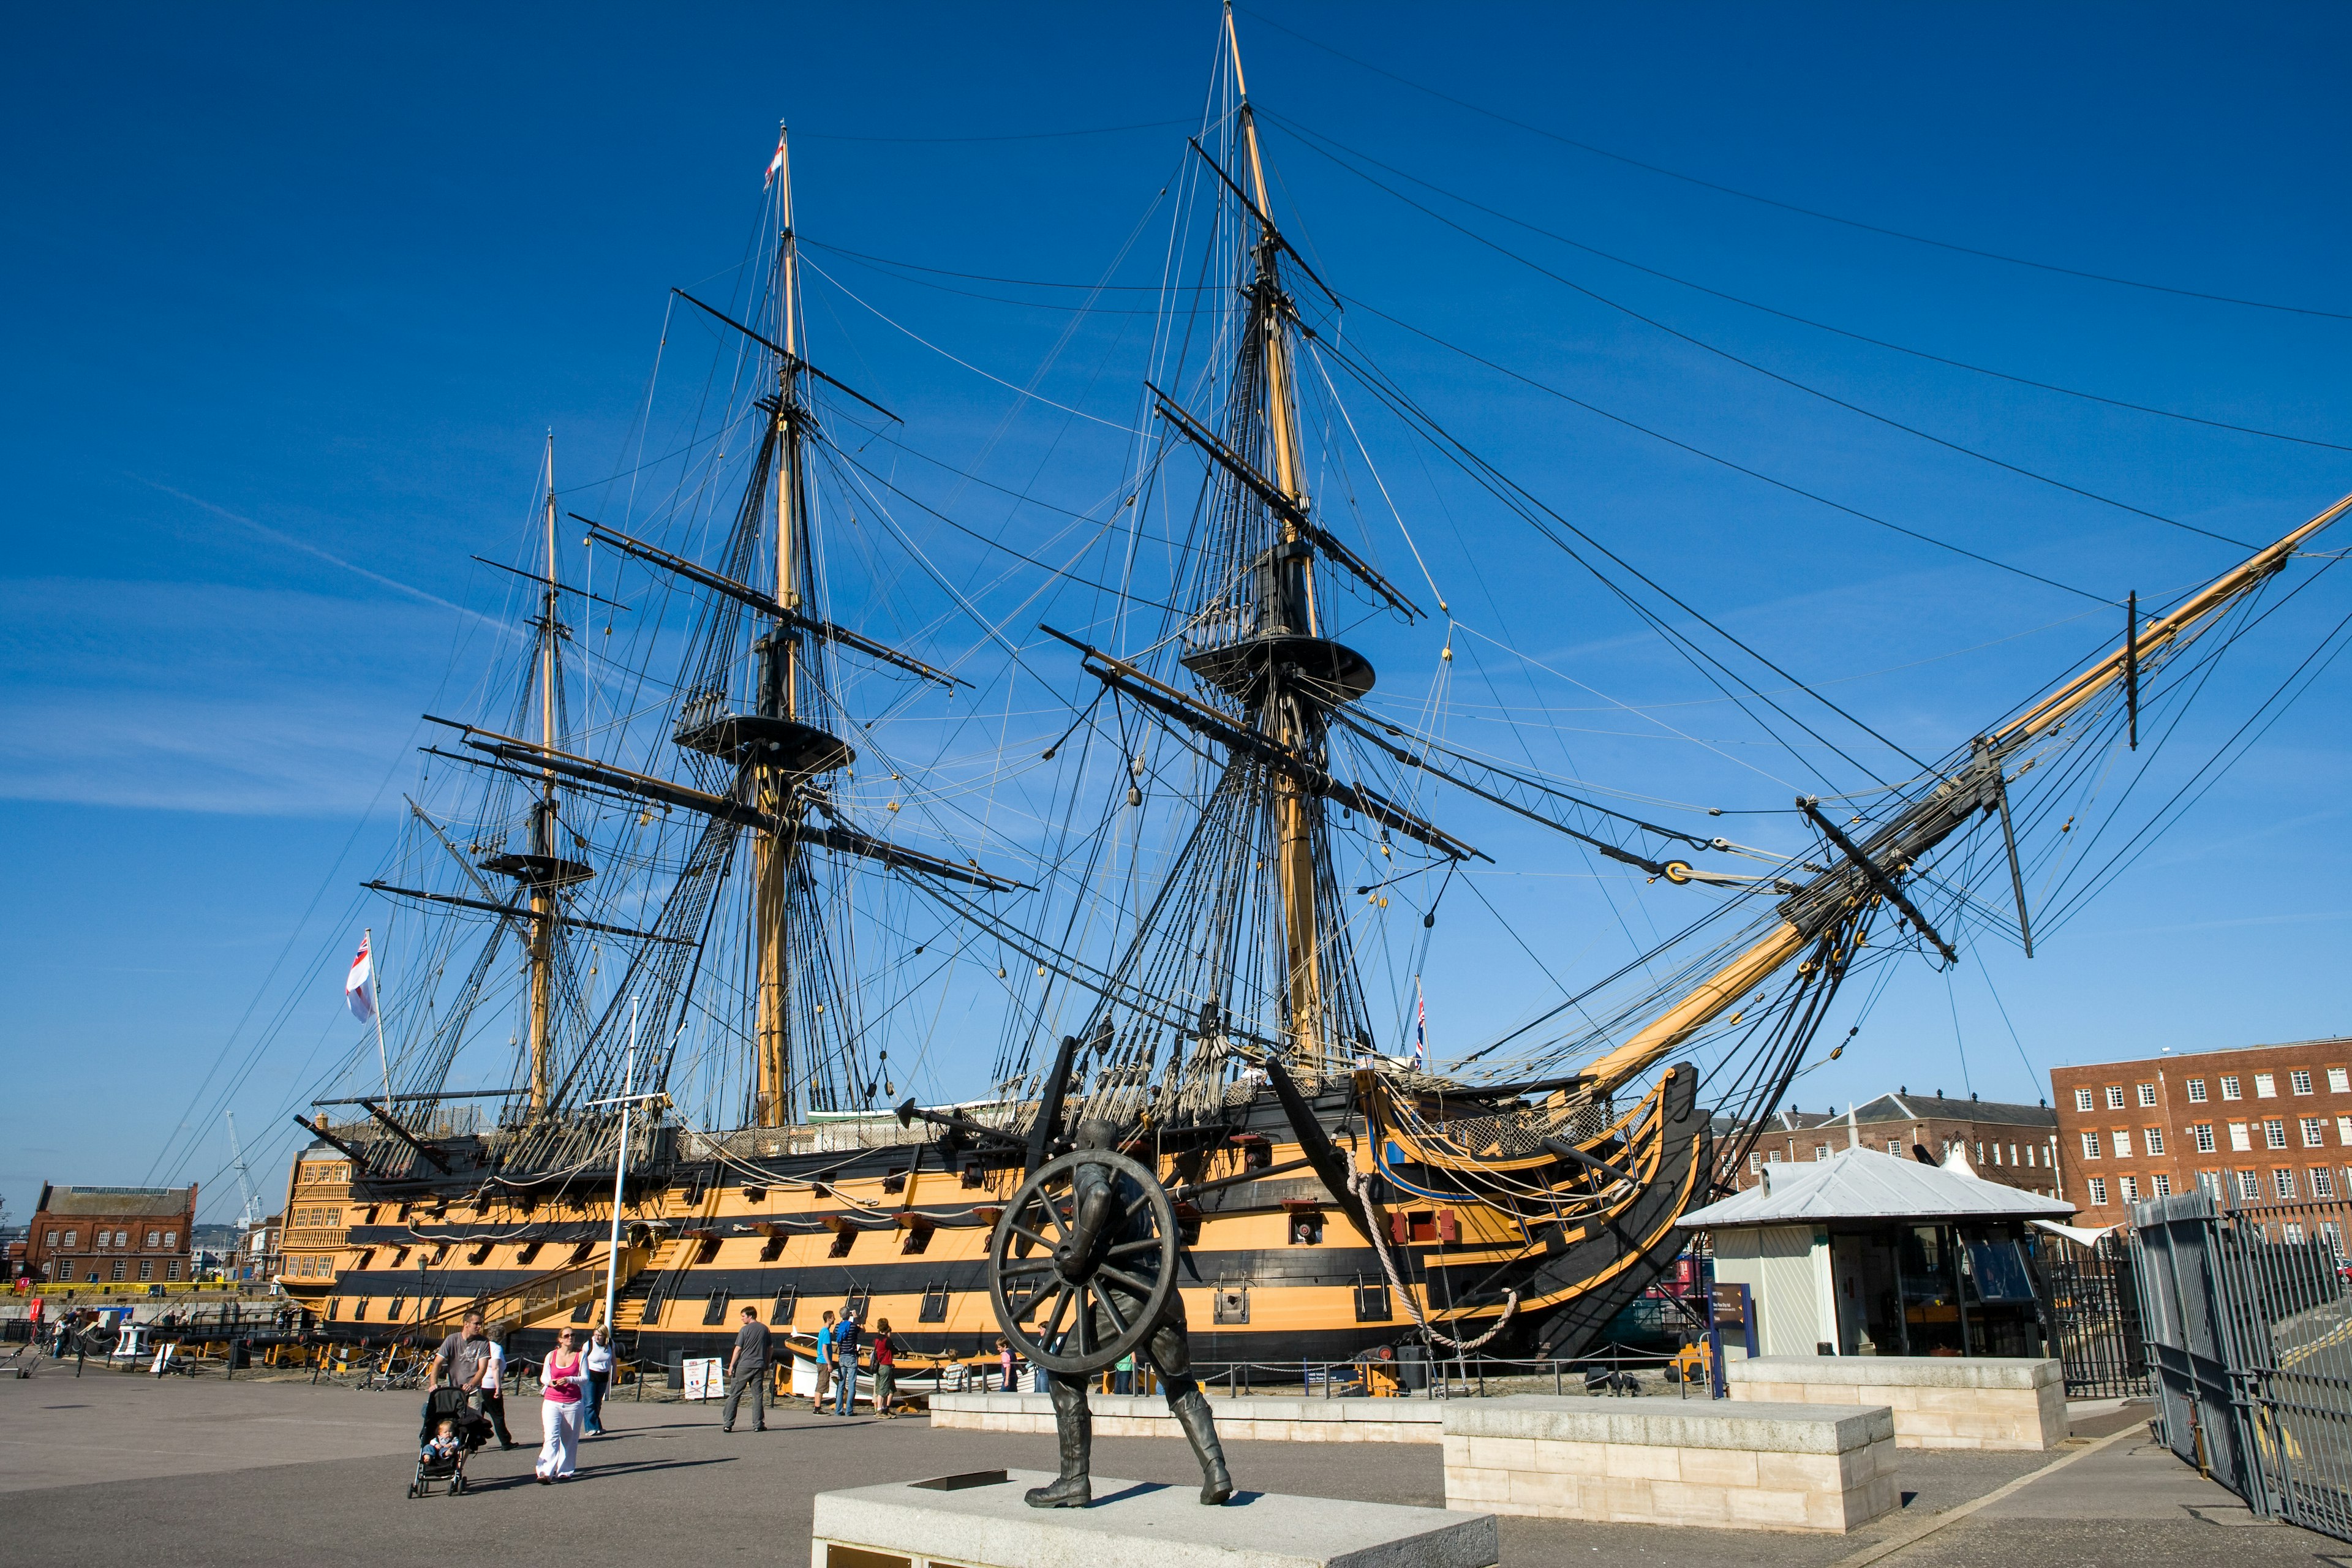 People walk in front of the three-mast HMS Victory ship in Portsmouth, Hampshire, England